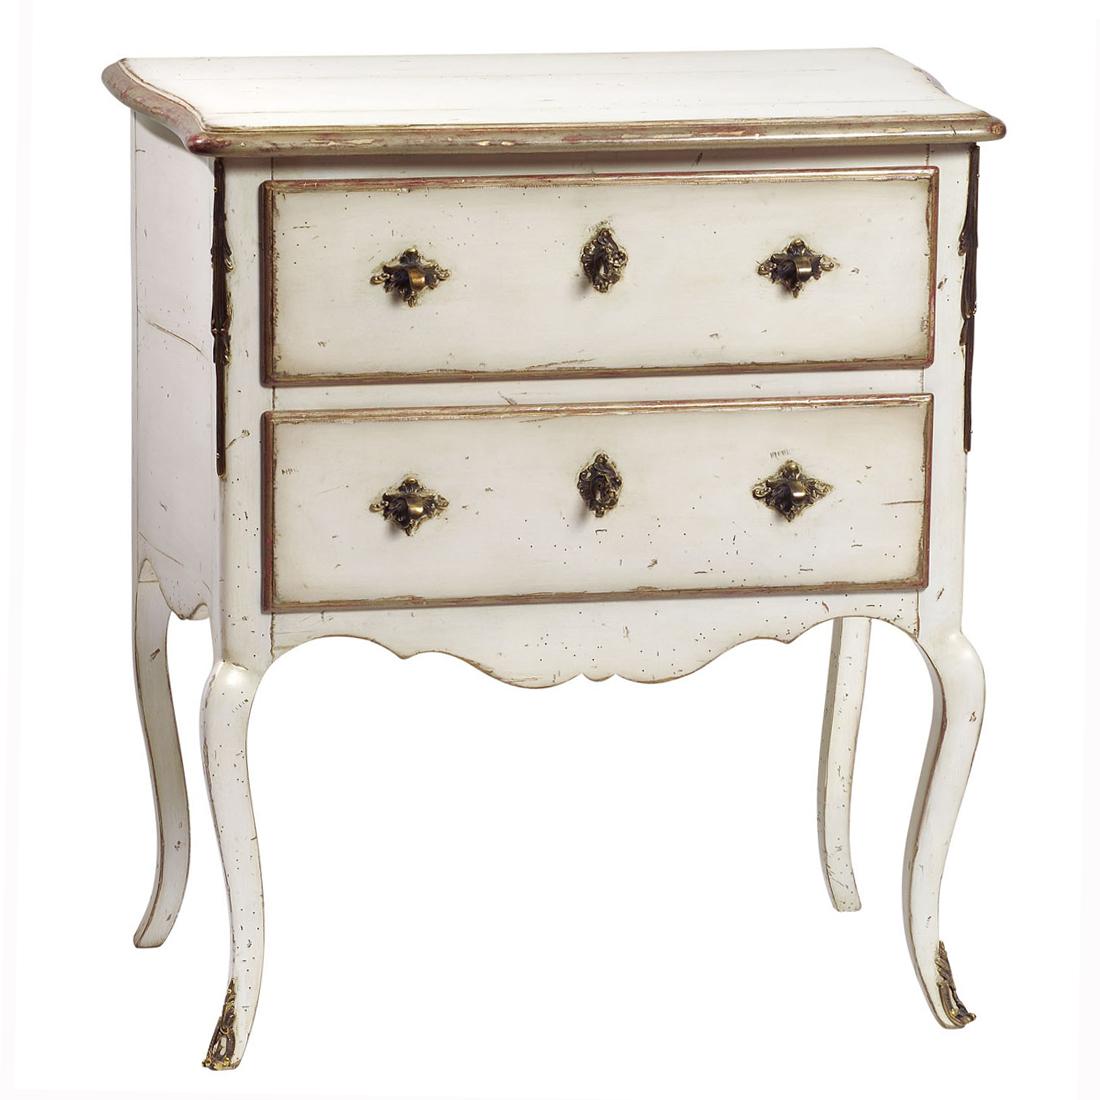 Vintage Louis XV style commode made in France in French sycamore with original brass fittings, natural lacquered French sycamore wood finish. Measures: width: 73cm / 28.7